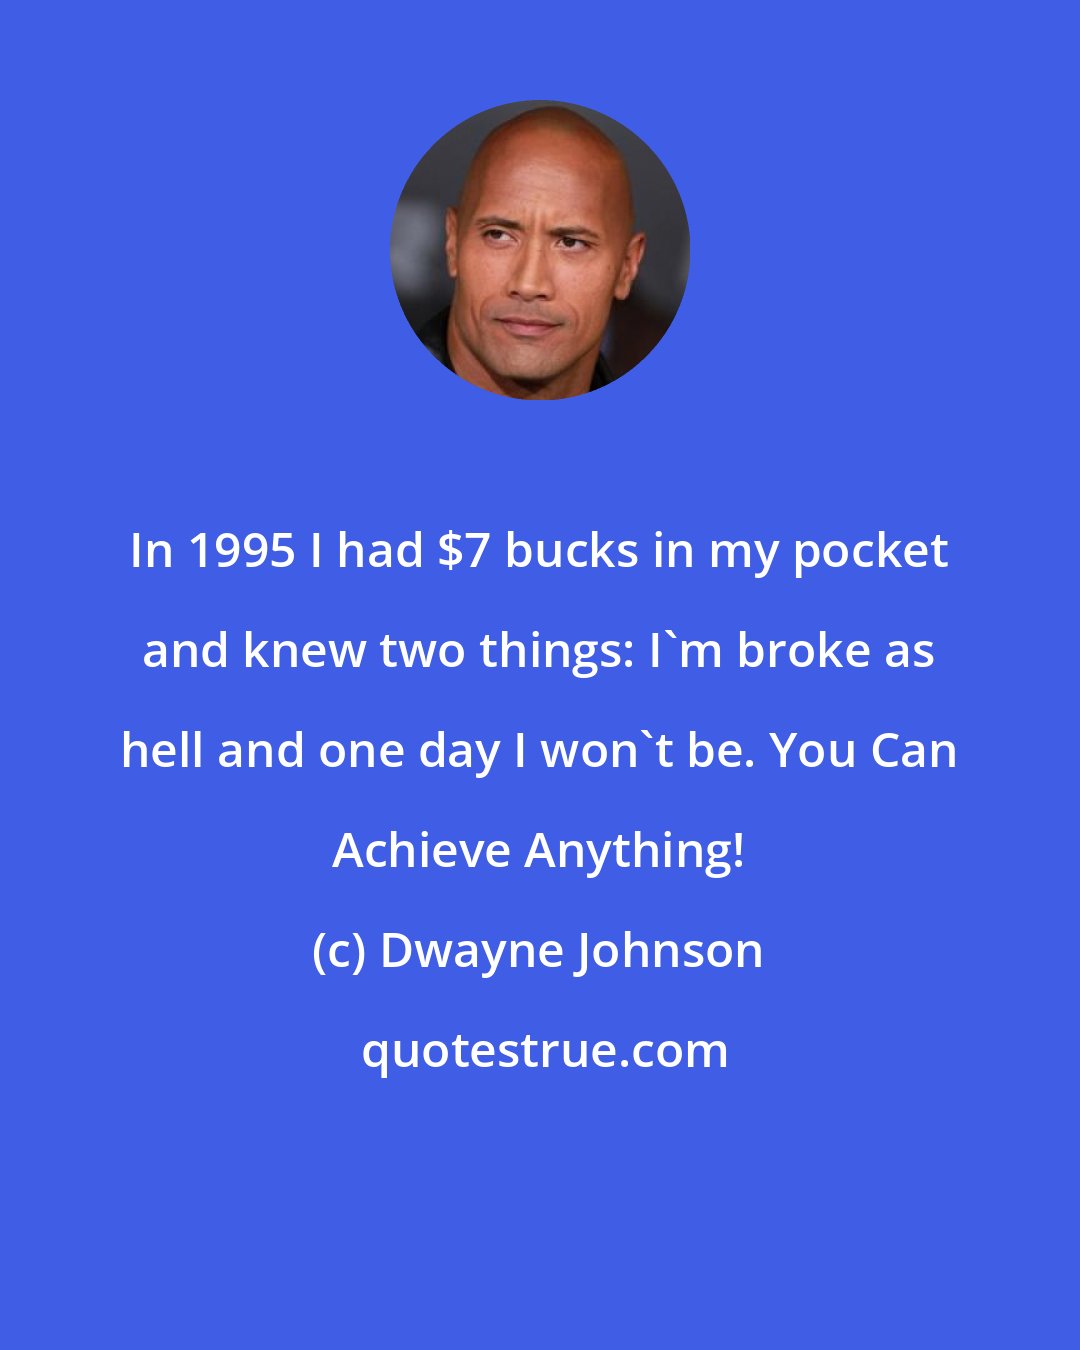 Dwayne Johnson: In 1995 I had $7 bucks in my pocket and knew two things: I'm broke as hell and one day I won't be. You Can Achieve Anything!